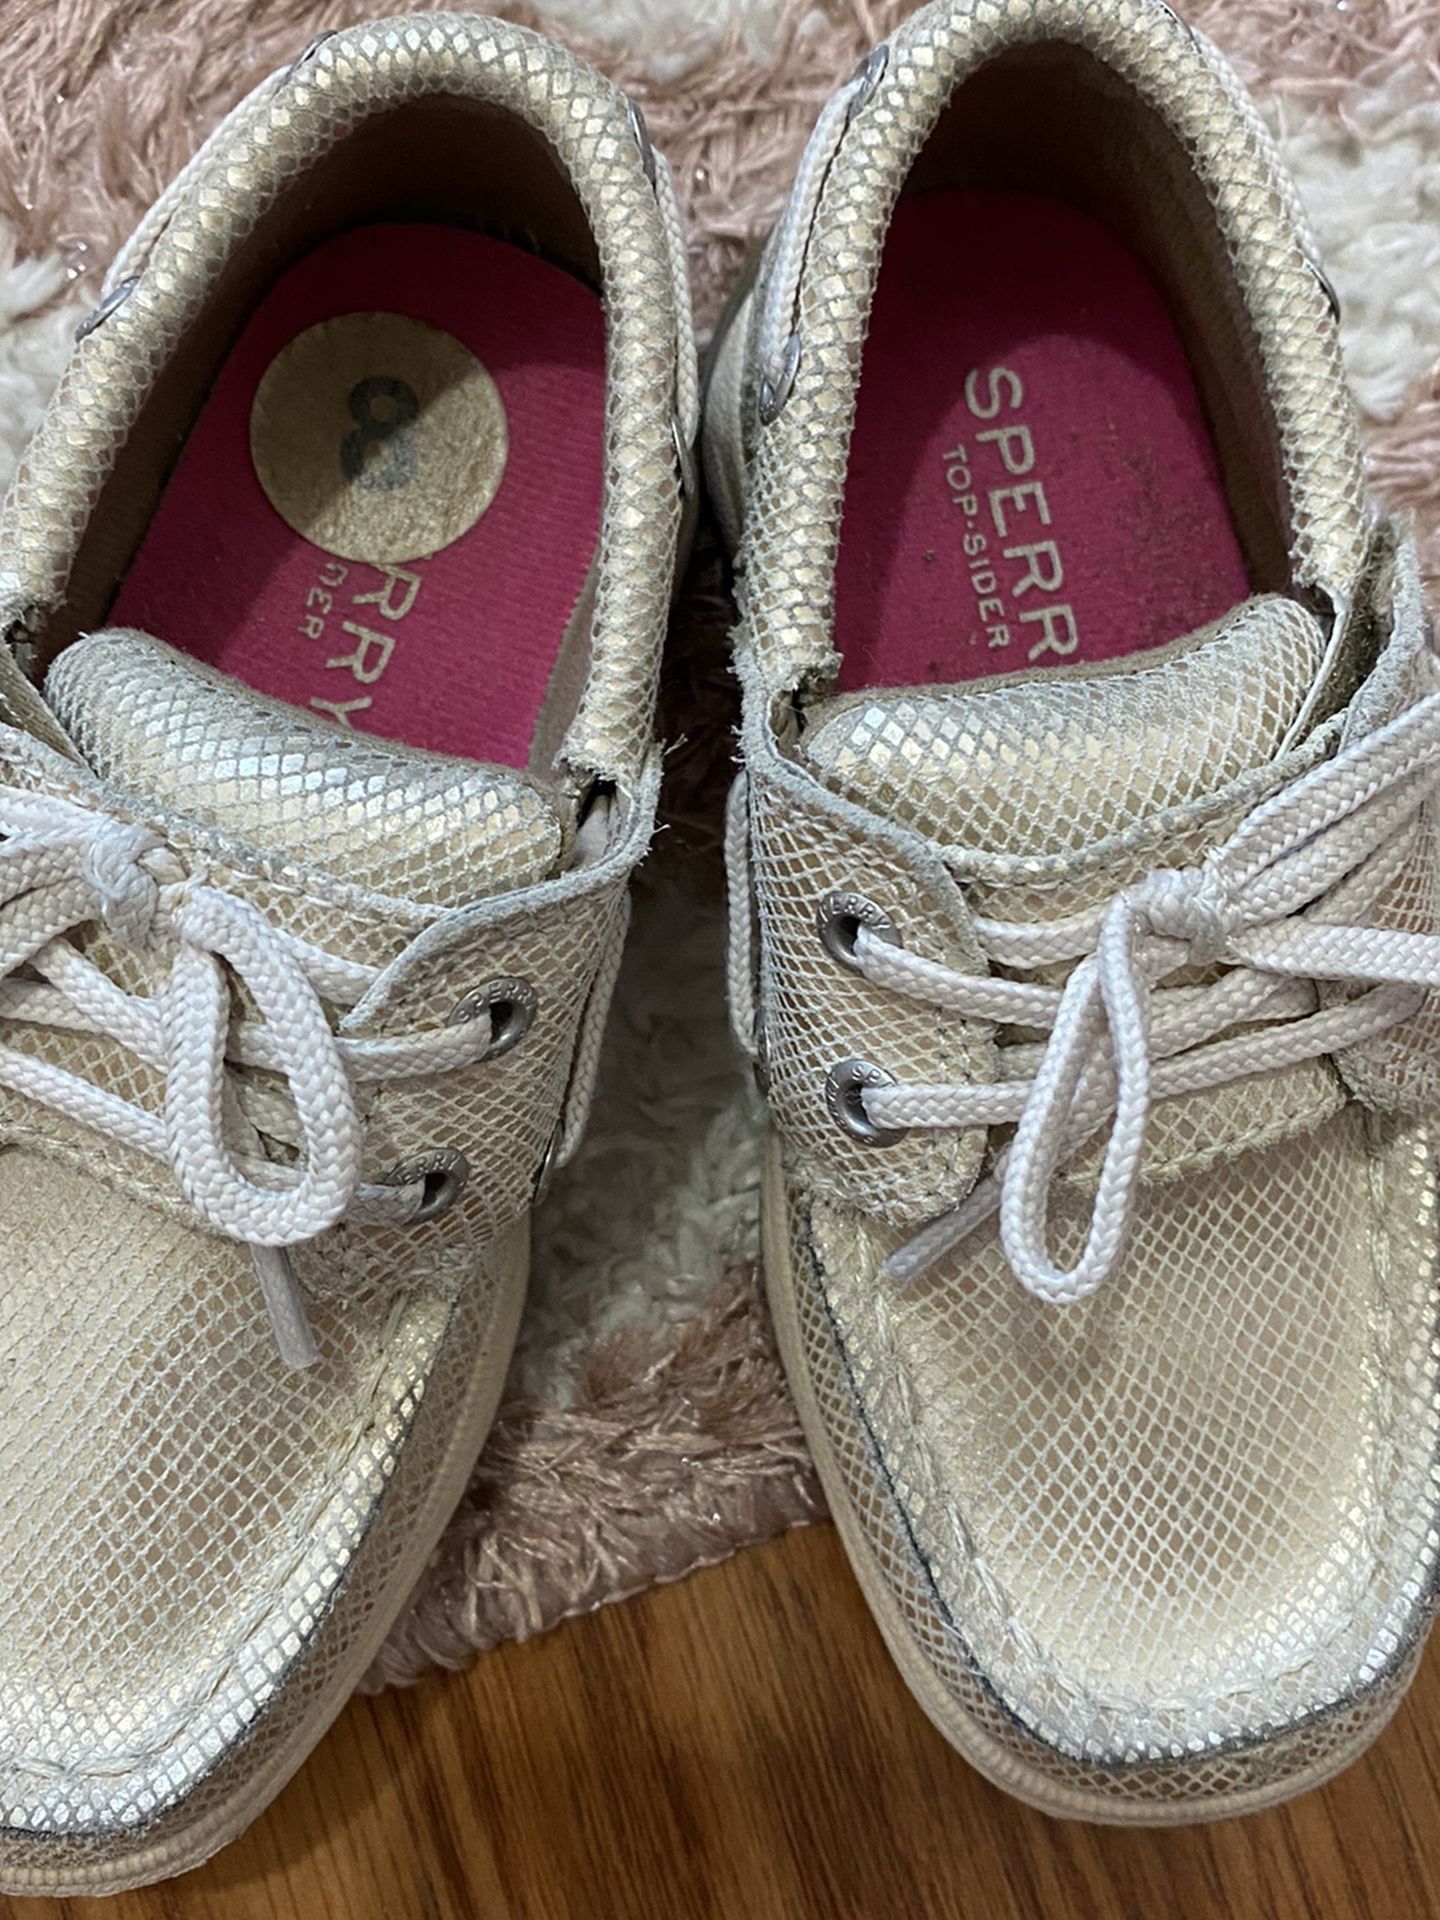 Little Girls Shoes(5 Pairs $10)